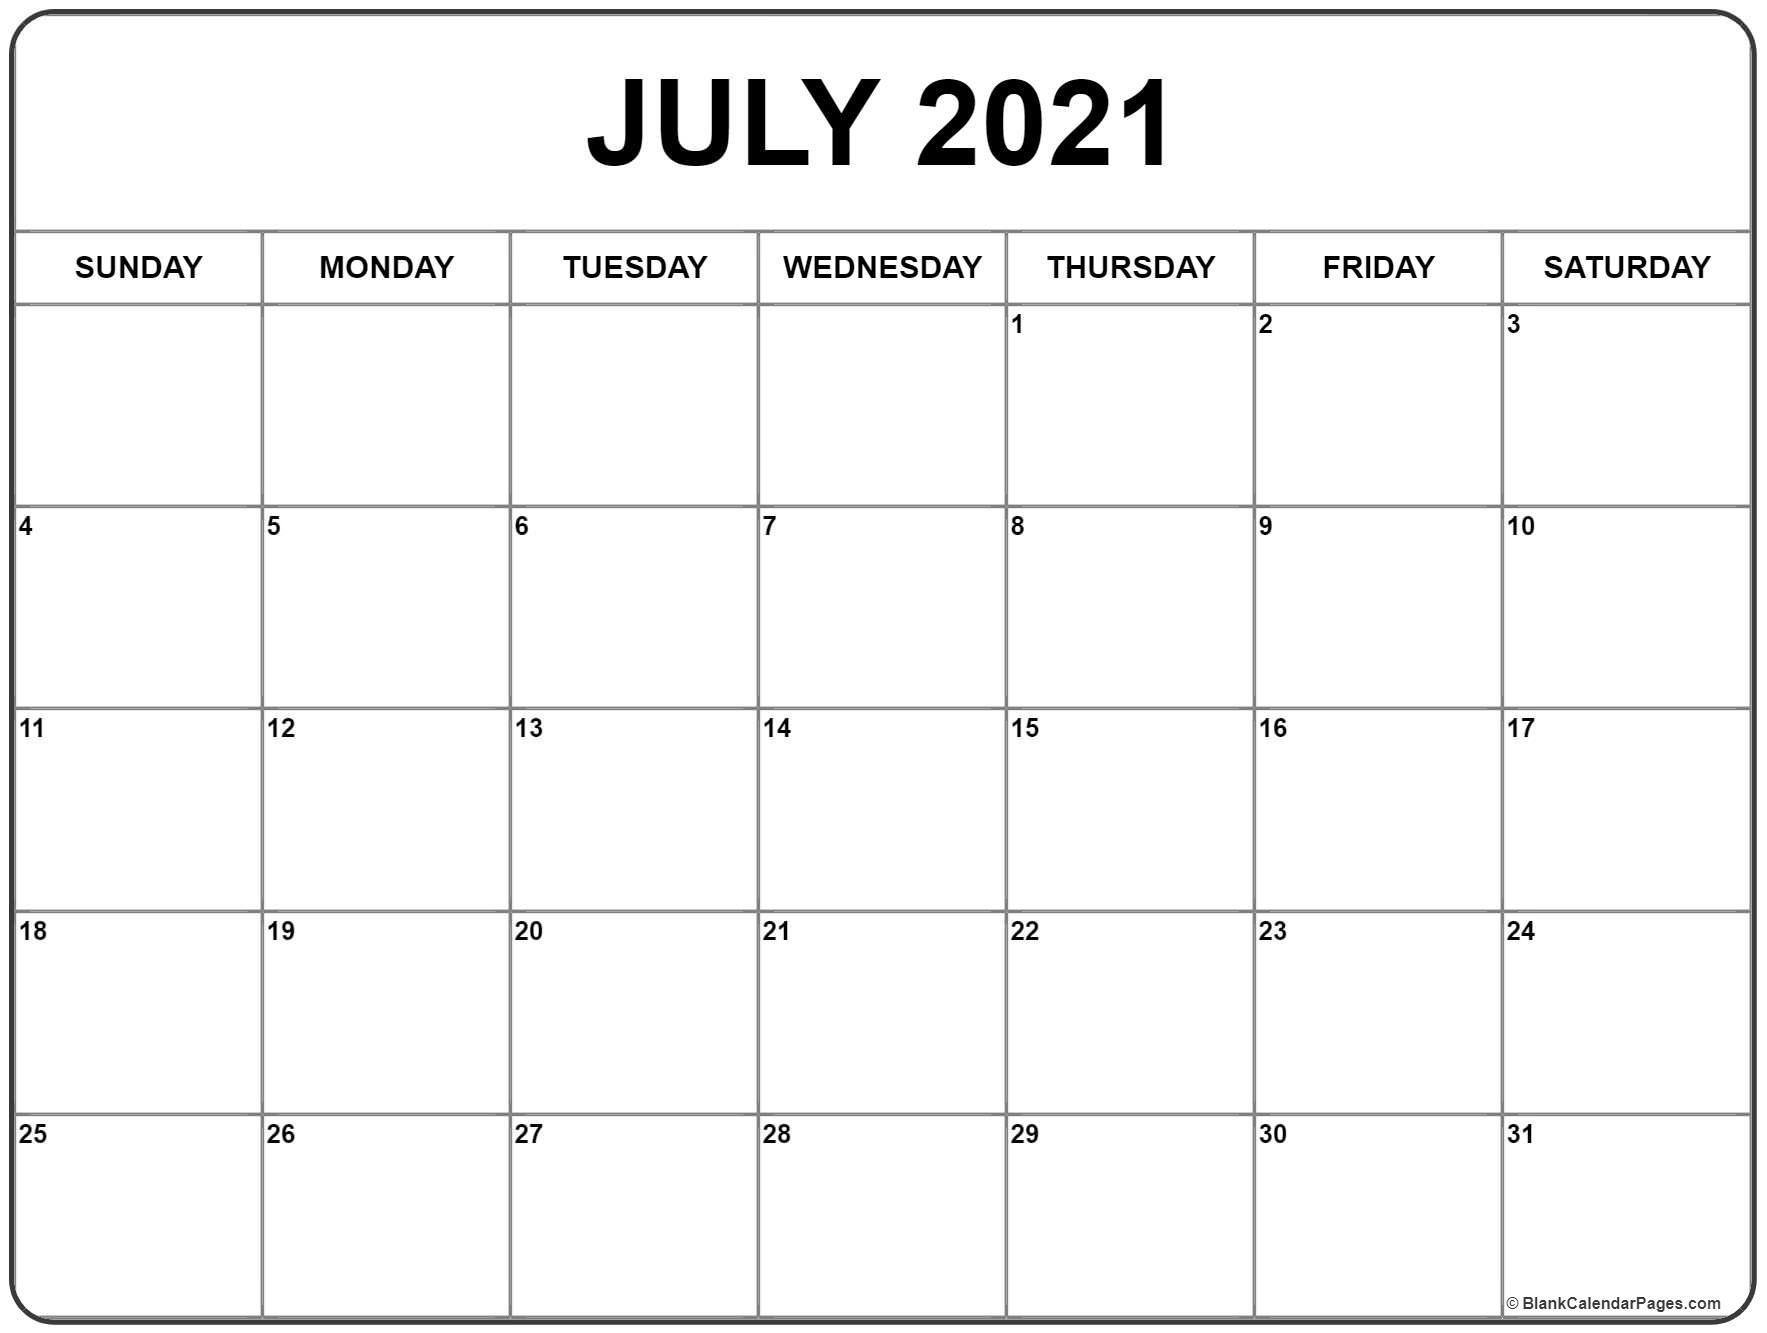 July 2021 Calendar | Free Printable Monthly Calendars Calendar 2021 Appointment Downloadable